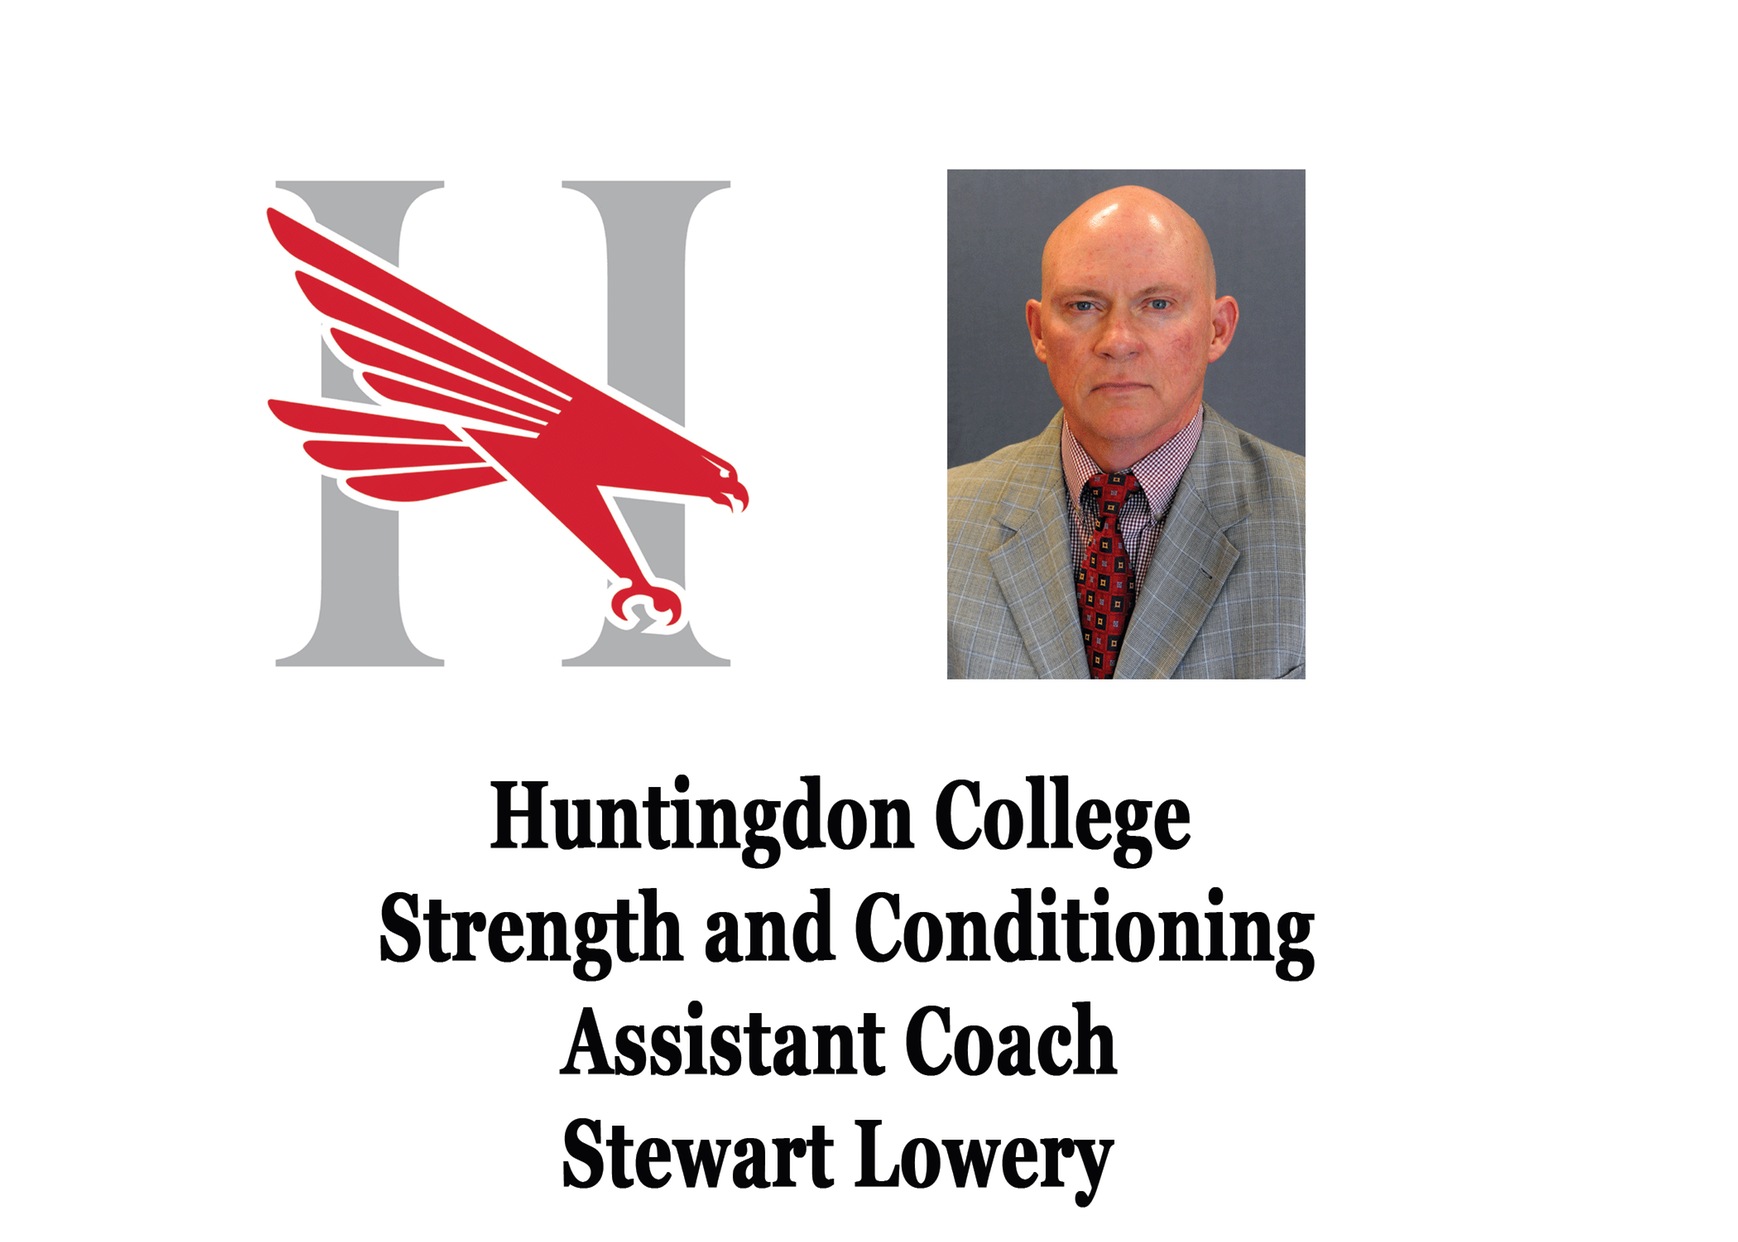 Lowery returns as Hawks’ assistant strength and conditioning coach